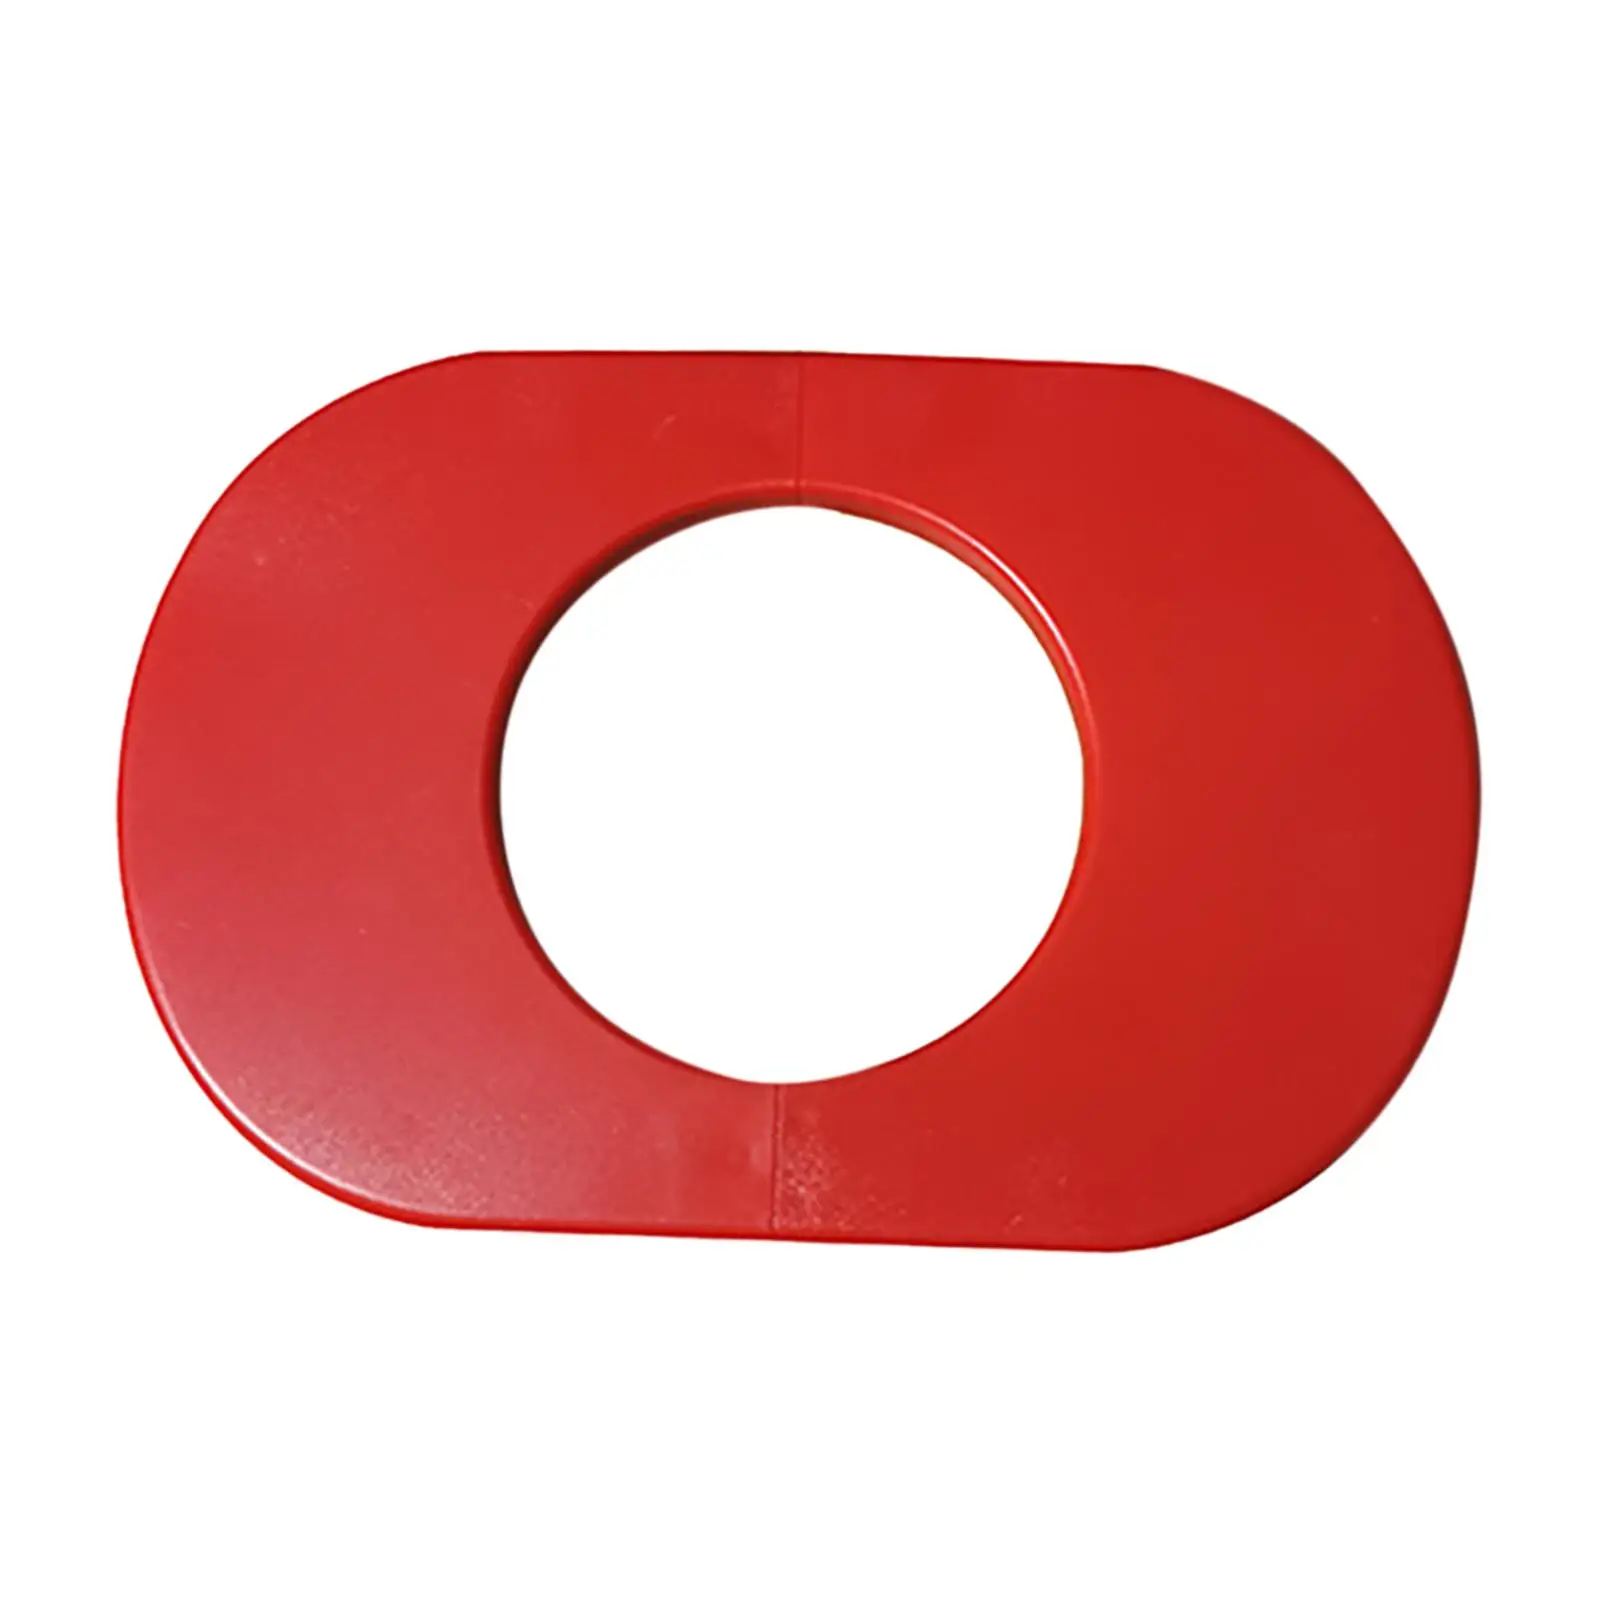 Fire Department Connection Cap Portable Fire Sprinkler Cover Decoration Cover for Construction Fire Pipes Maintenance